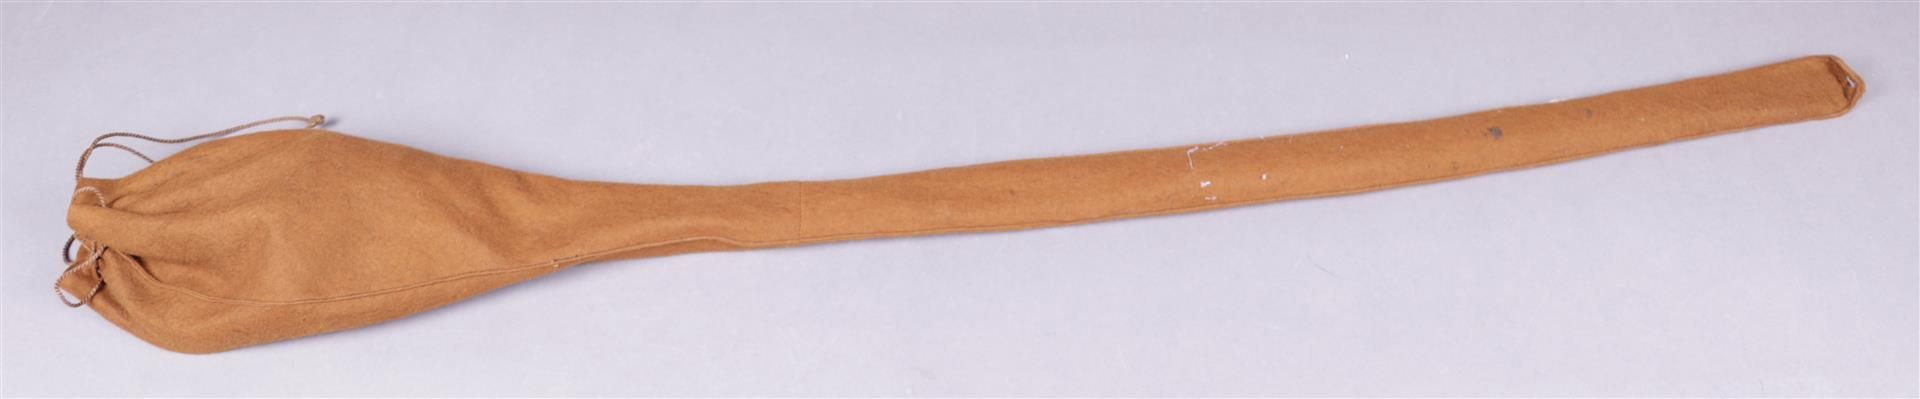 Netherlands - Ironcutter - Officers / parade sabre. Marked on the blade. Approx. 1900 - 1930
lengte  - Image 5 of 5